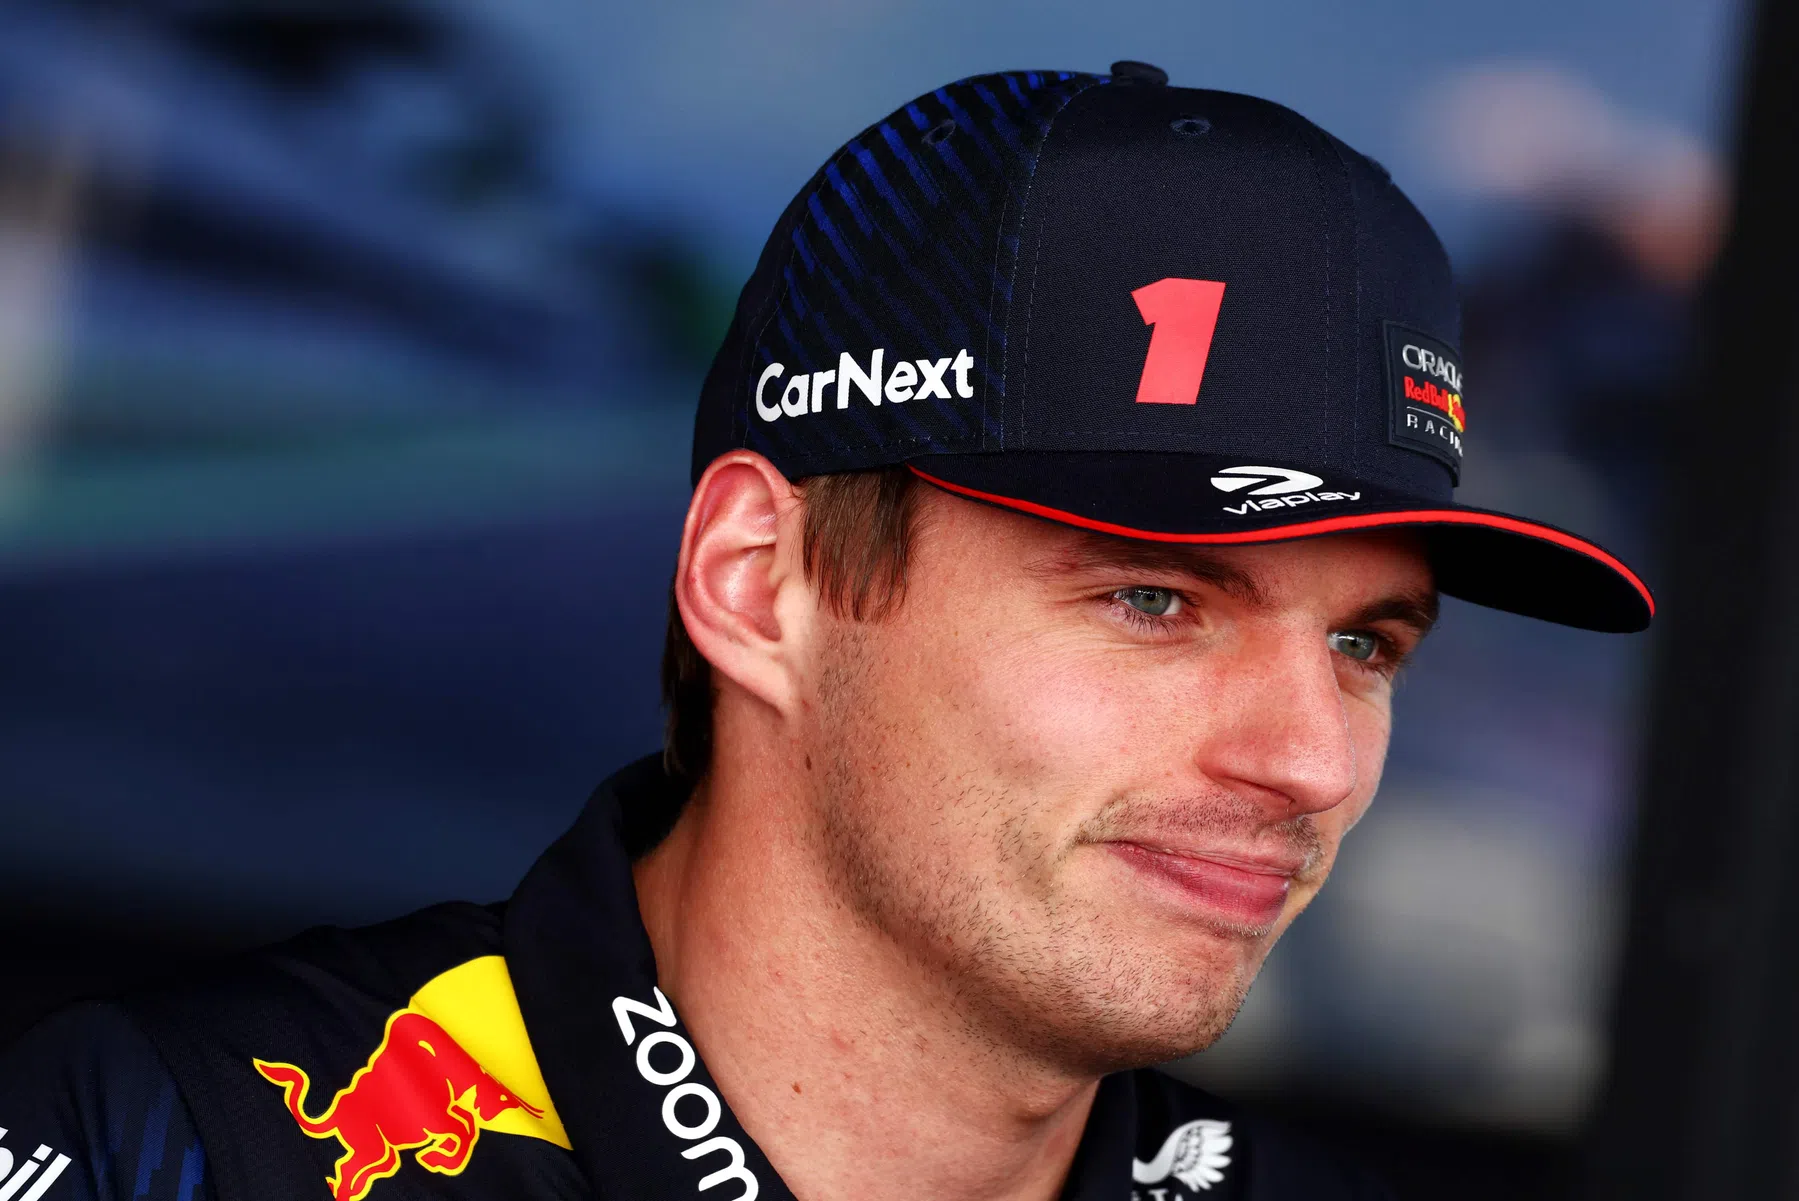 Verstappen statistiques f1 pole positions charles leclerc